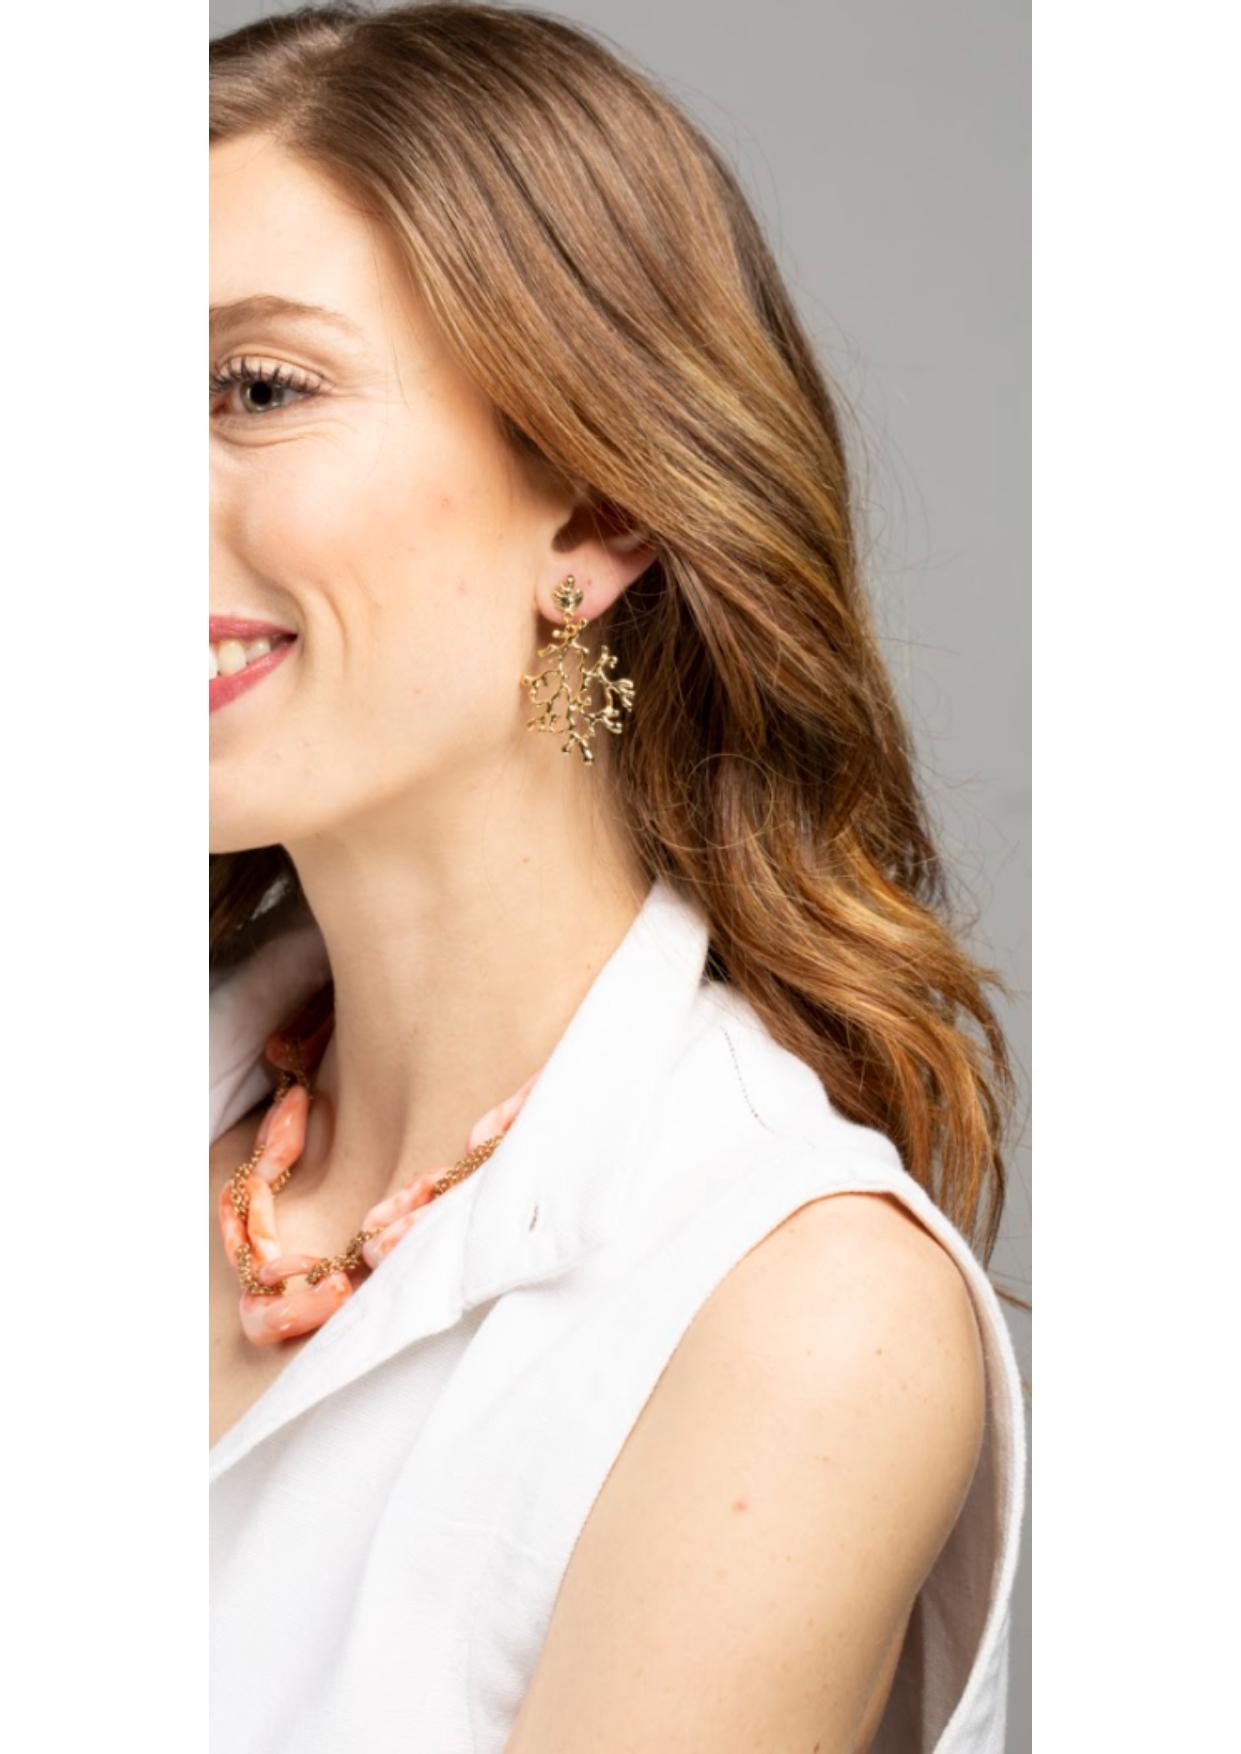 Alex Jona design collection, hand crafted in Italy, 18 karat polished yellow gold branch dangling ear pendants. Dimensions: H 1.9 in / 5 cm X W 1.22 in / 3 cm X D 0.10 in / 2.53 mm 

Alex Jona jewels stand out, not only for their special design and